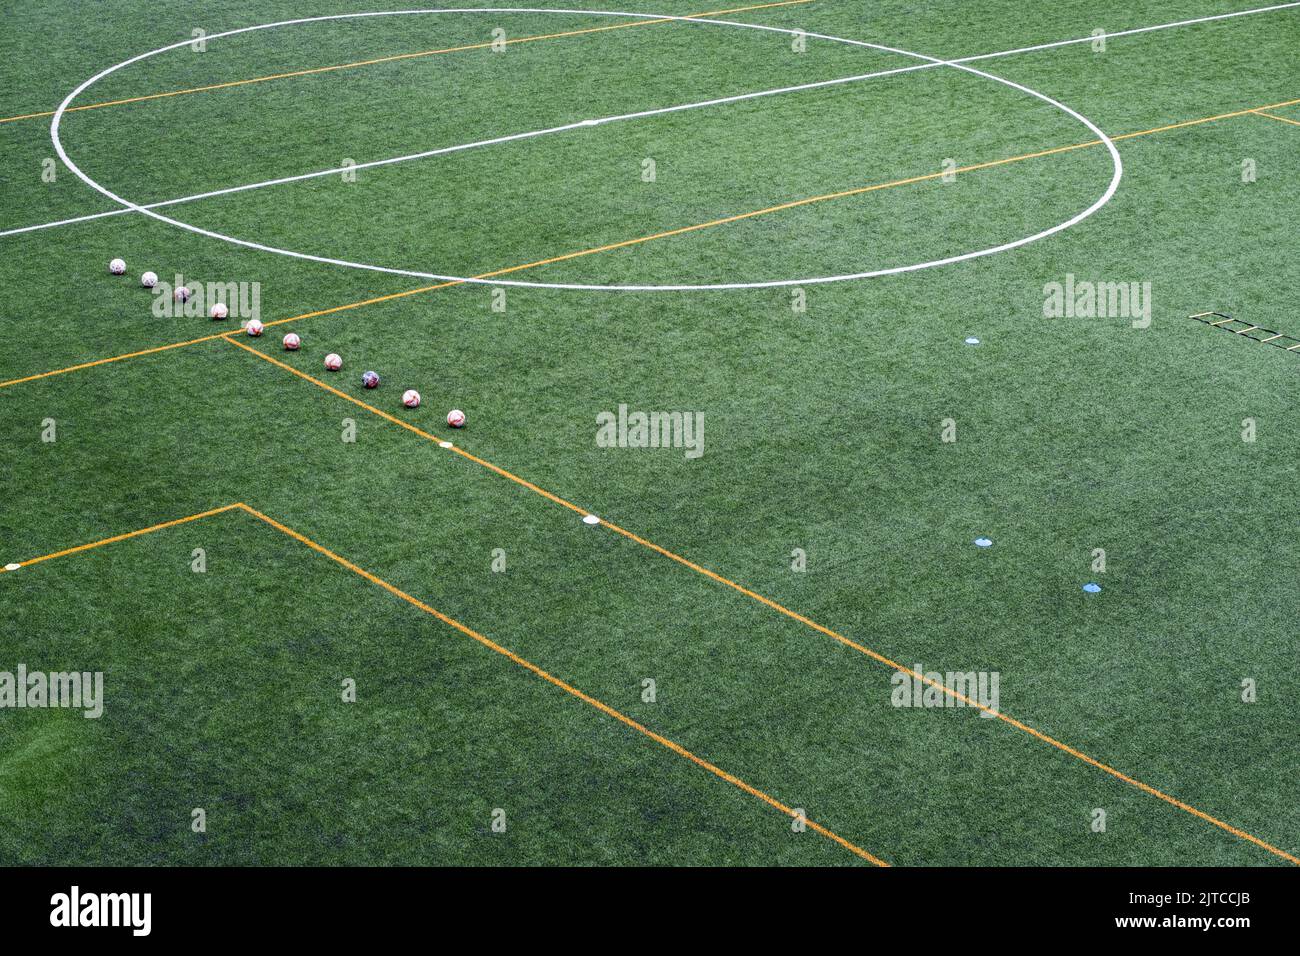 Soccer balls lined up on the field before the local team's practice session. Equipment for the training session on the surface of an artificial turf. Stock Photo